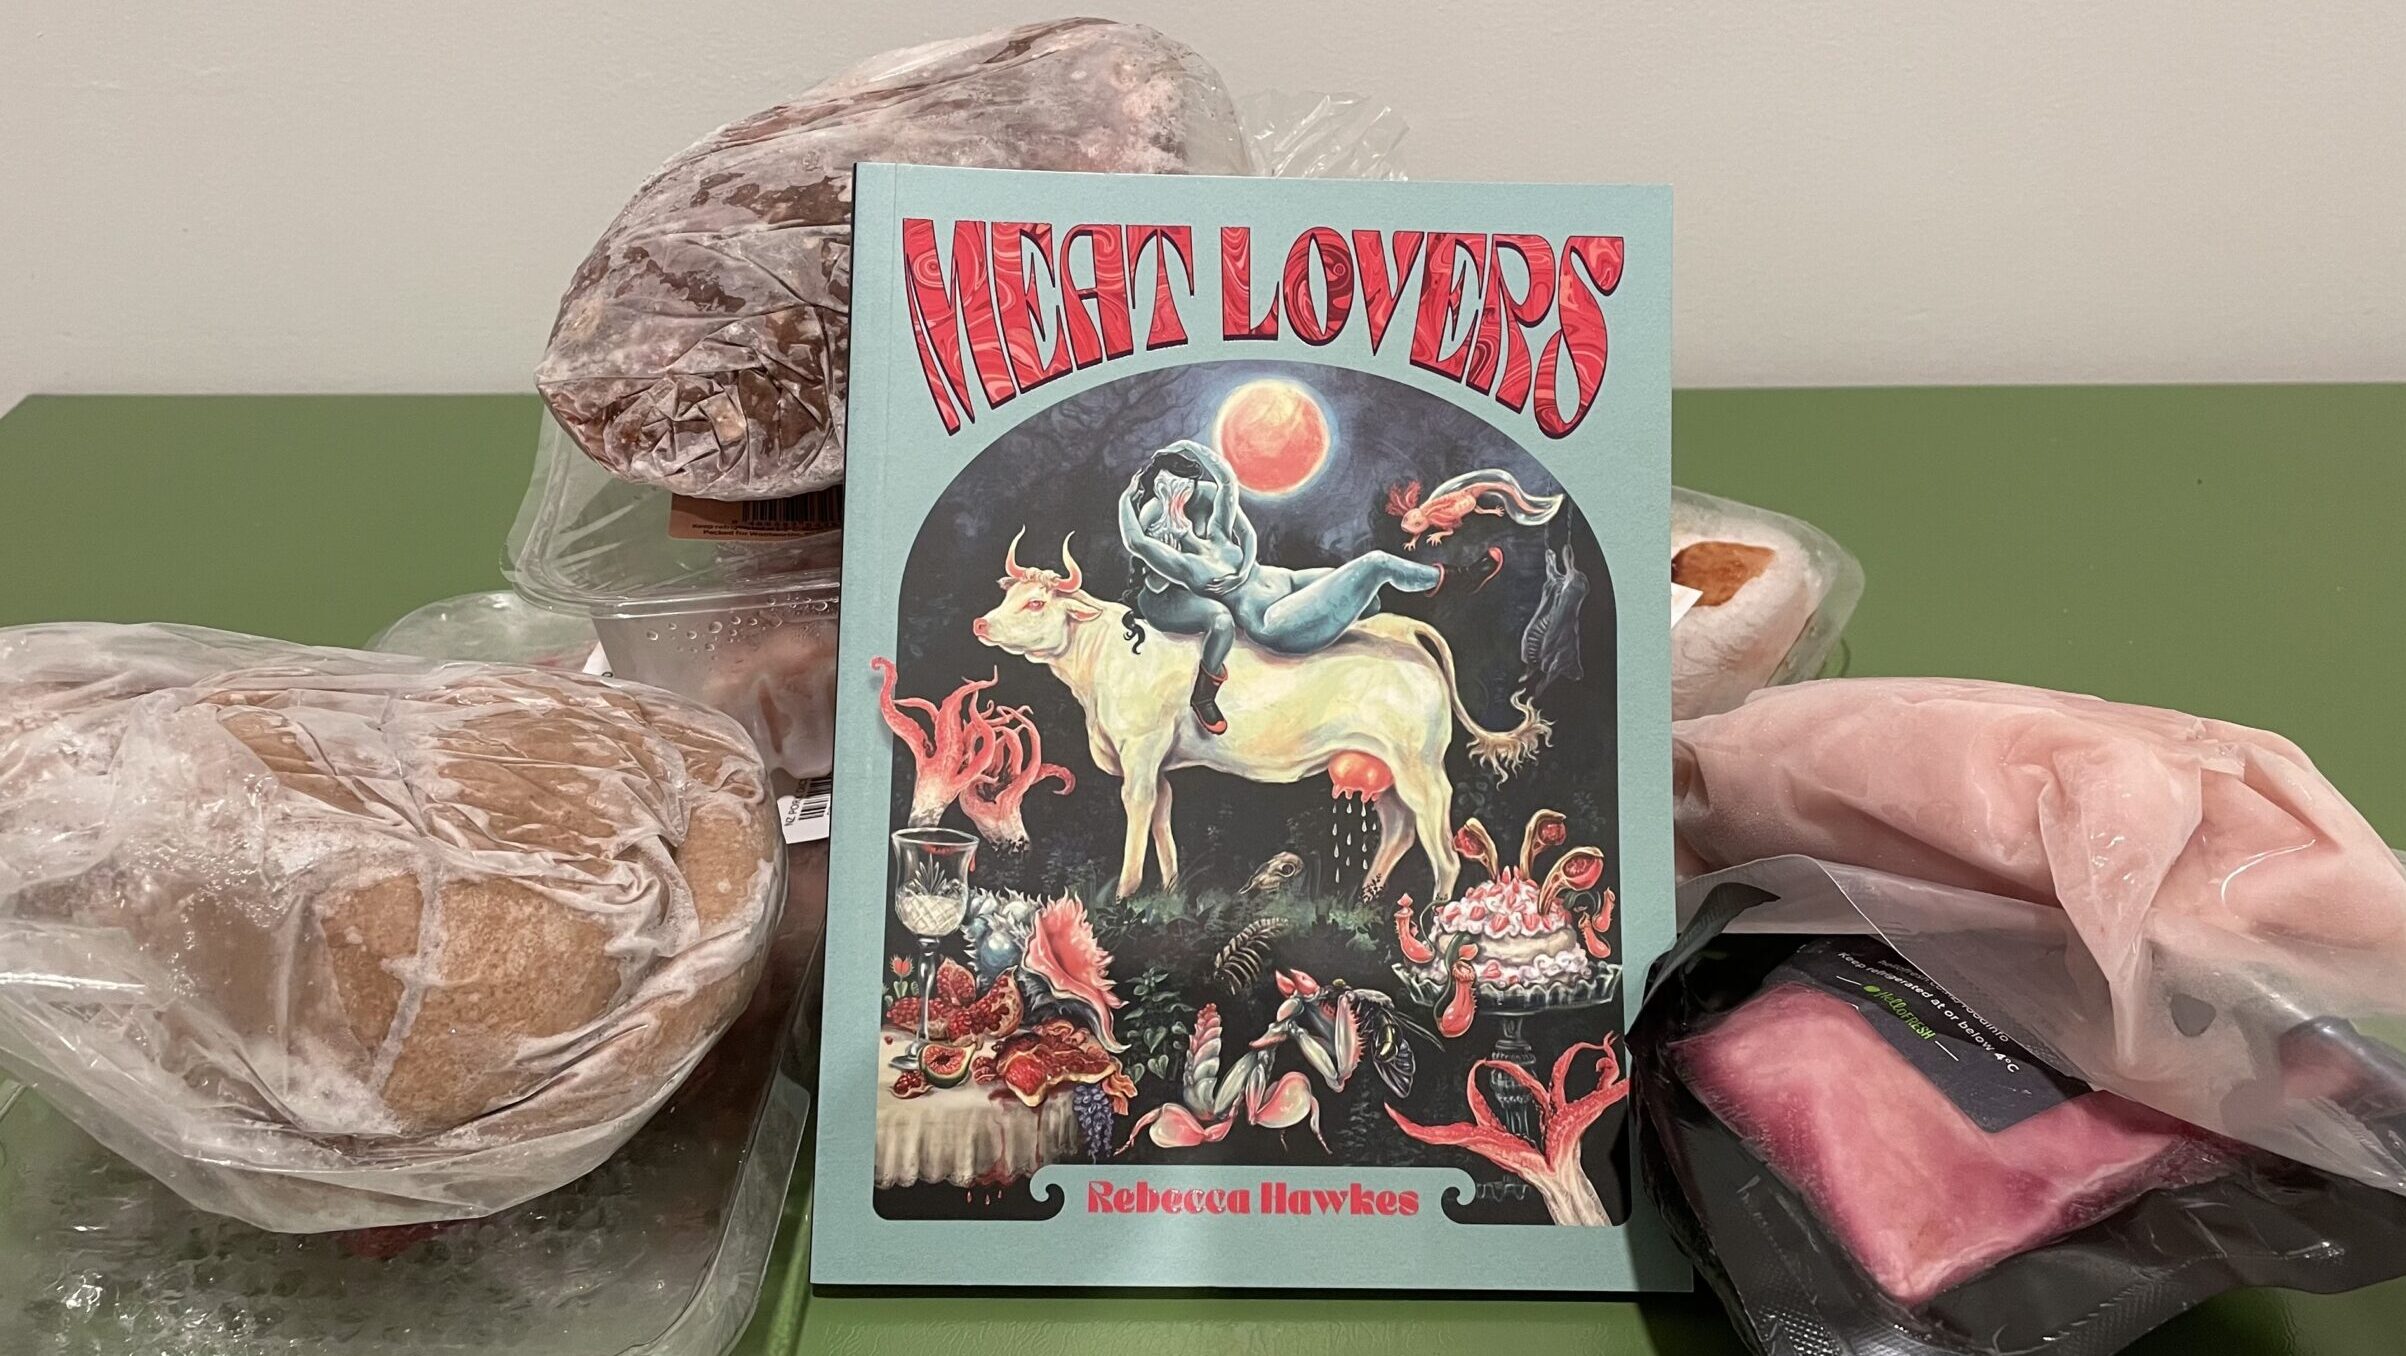 Meat Lovers by Rebecca Hawkes